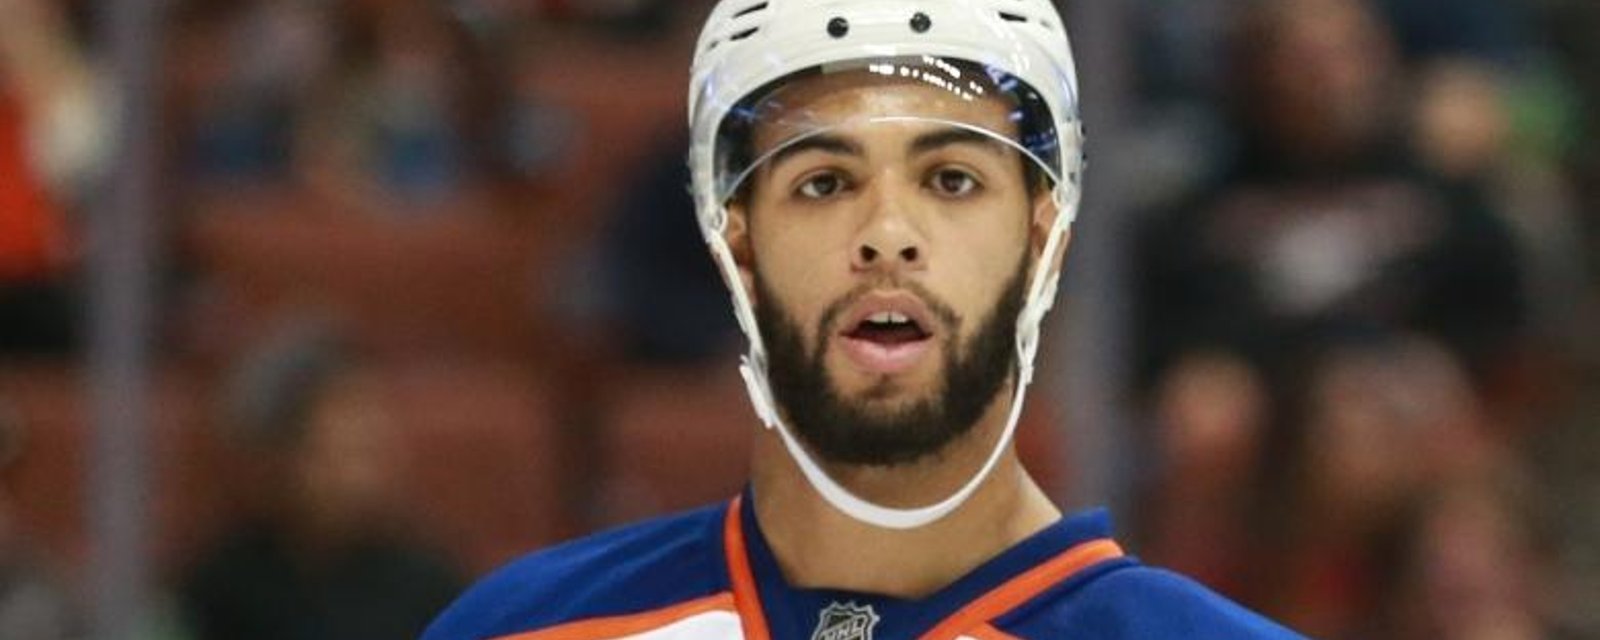 Darnell Nurse suspended for his late attack on Roman Polak.